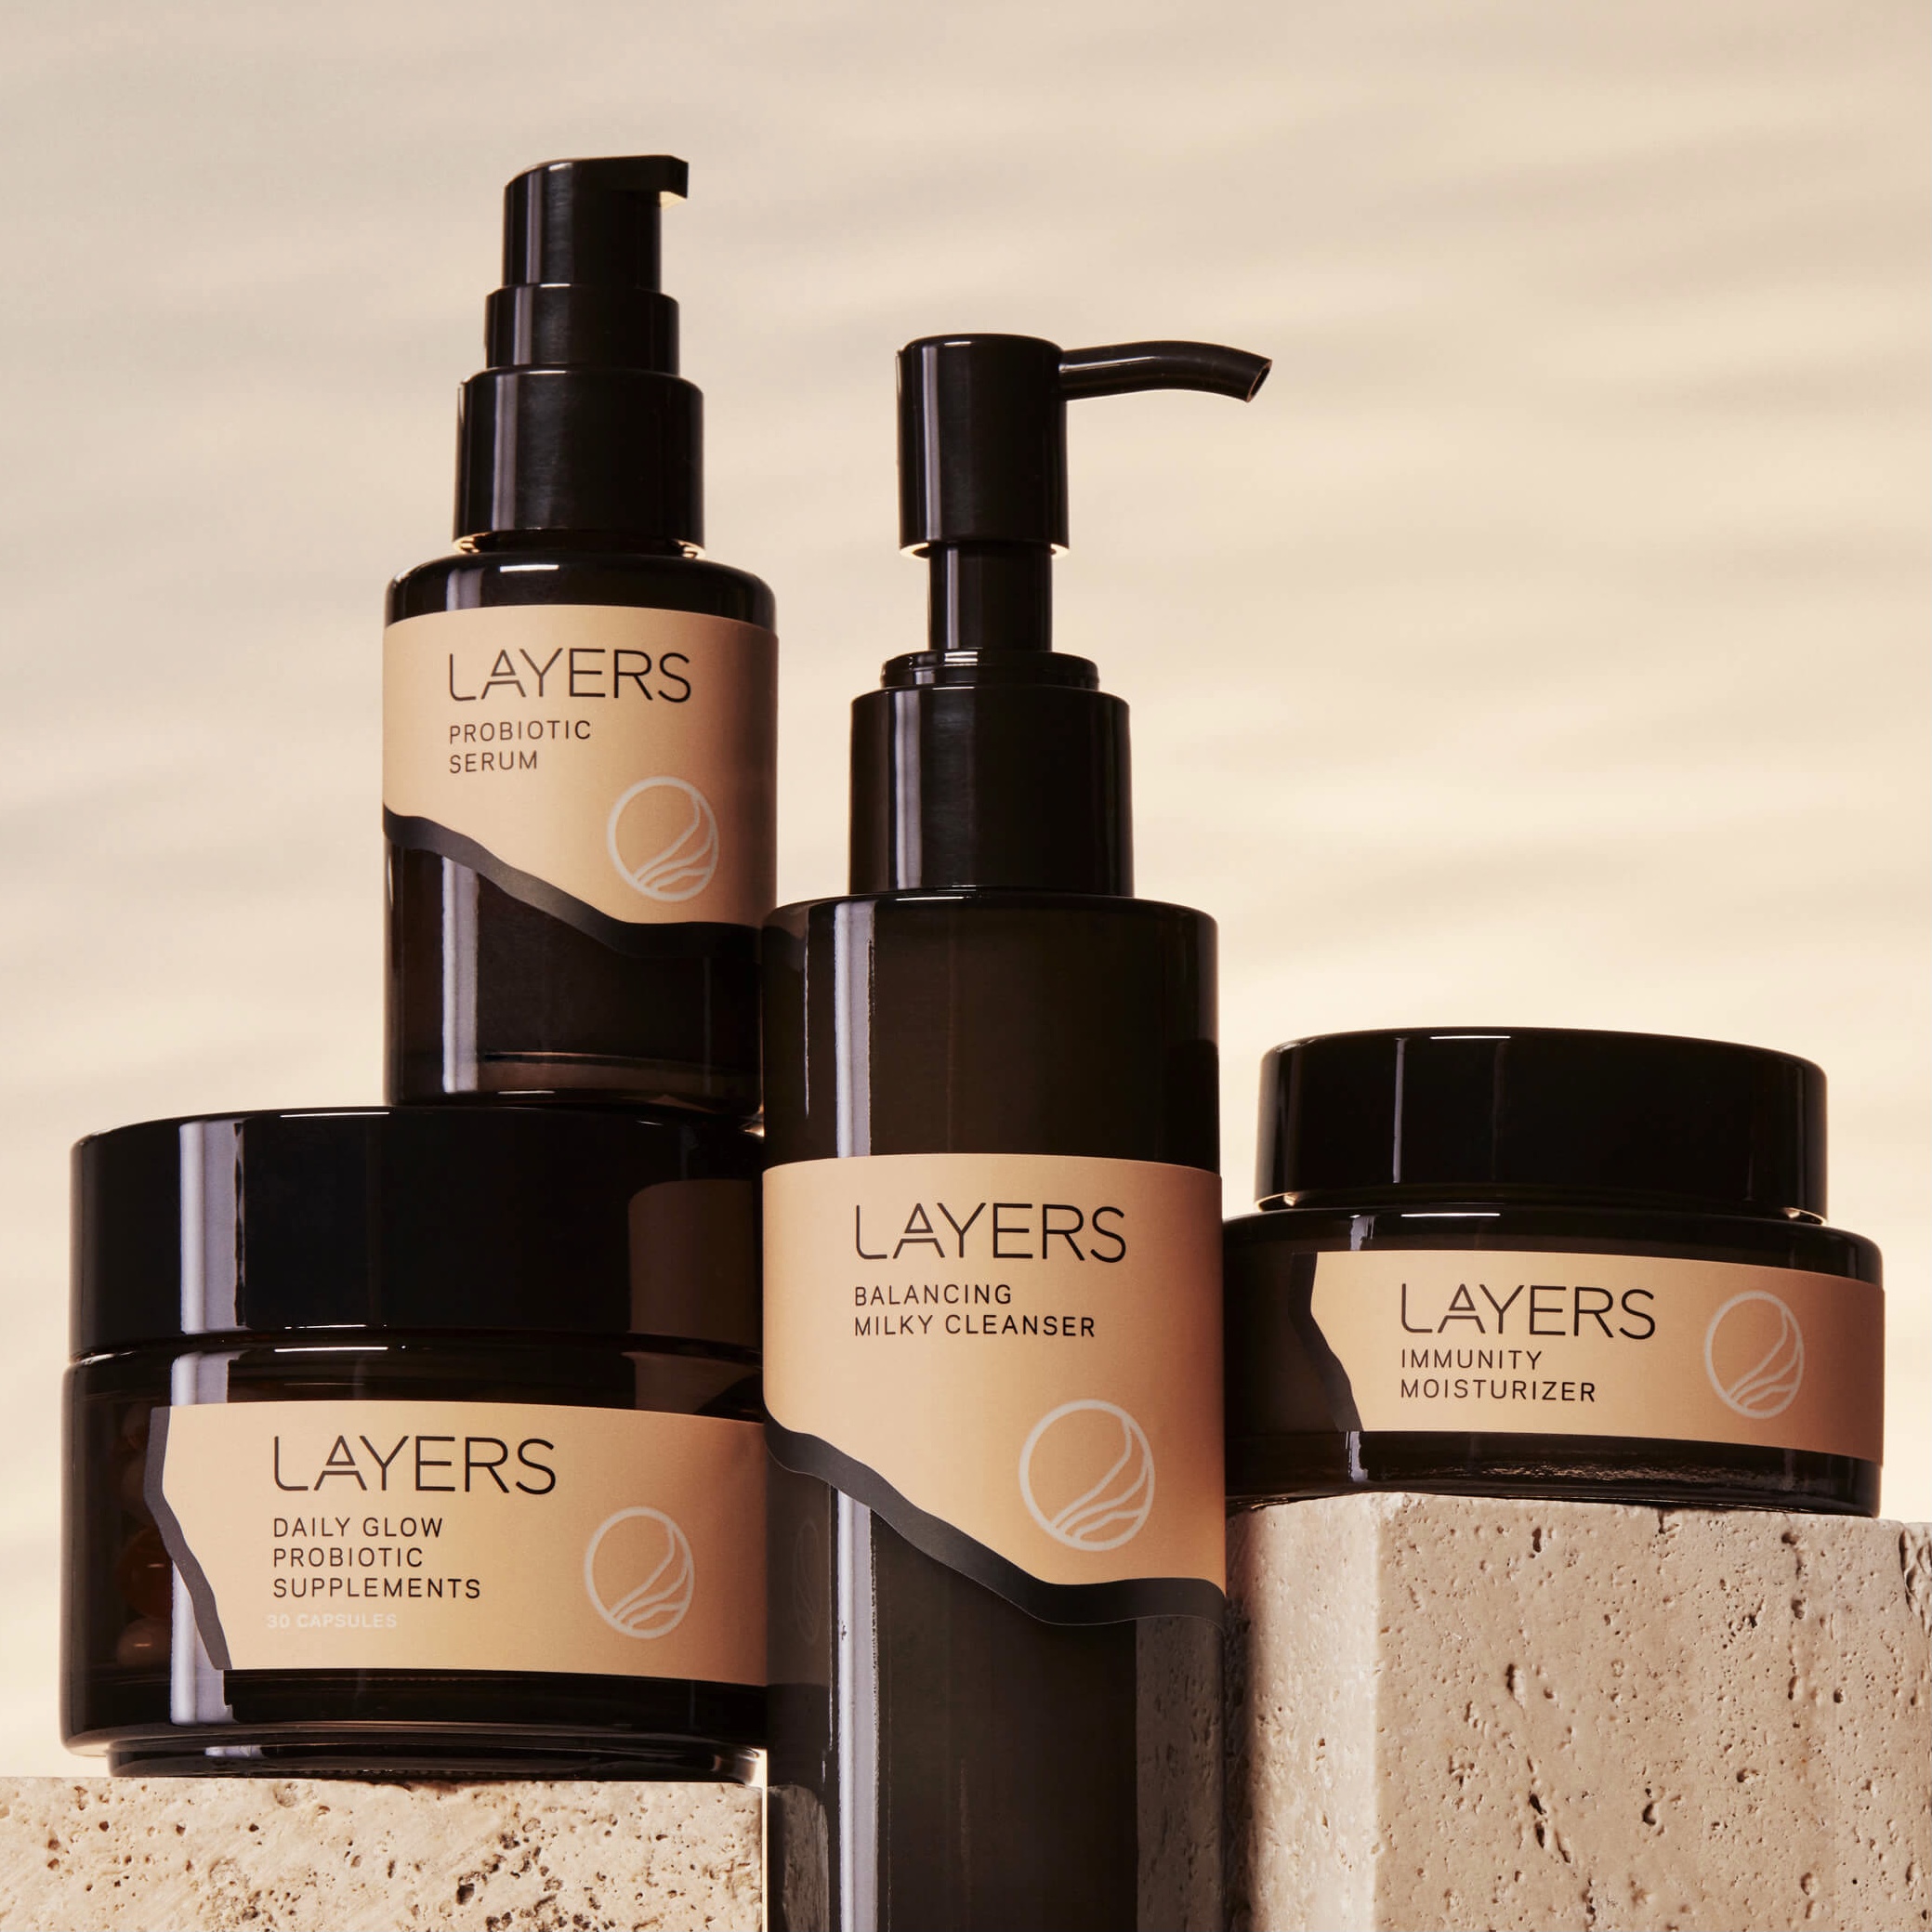 Layers Probiotic Skincare Group Product Shot with Semi-Transparent Glass Packaging and Pink Labels. For dry skin, oily skin, combination skin. 